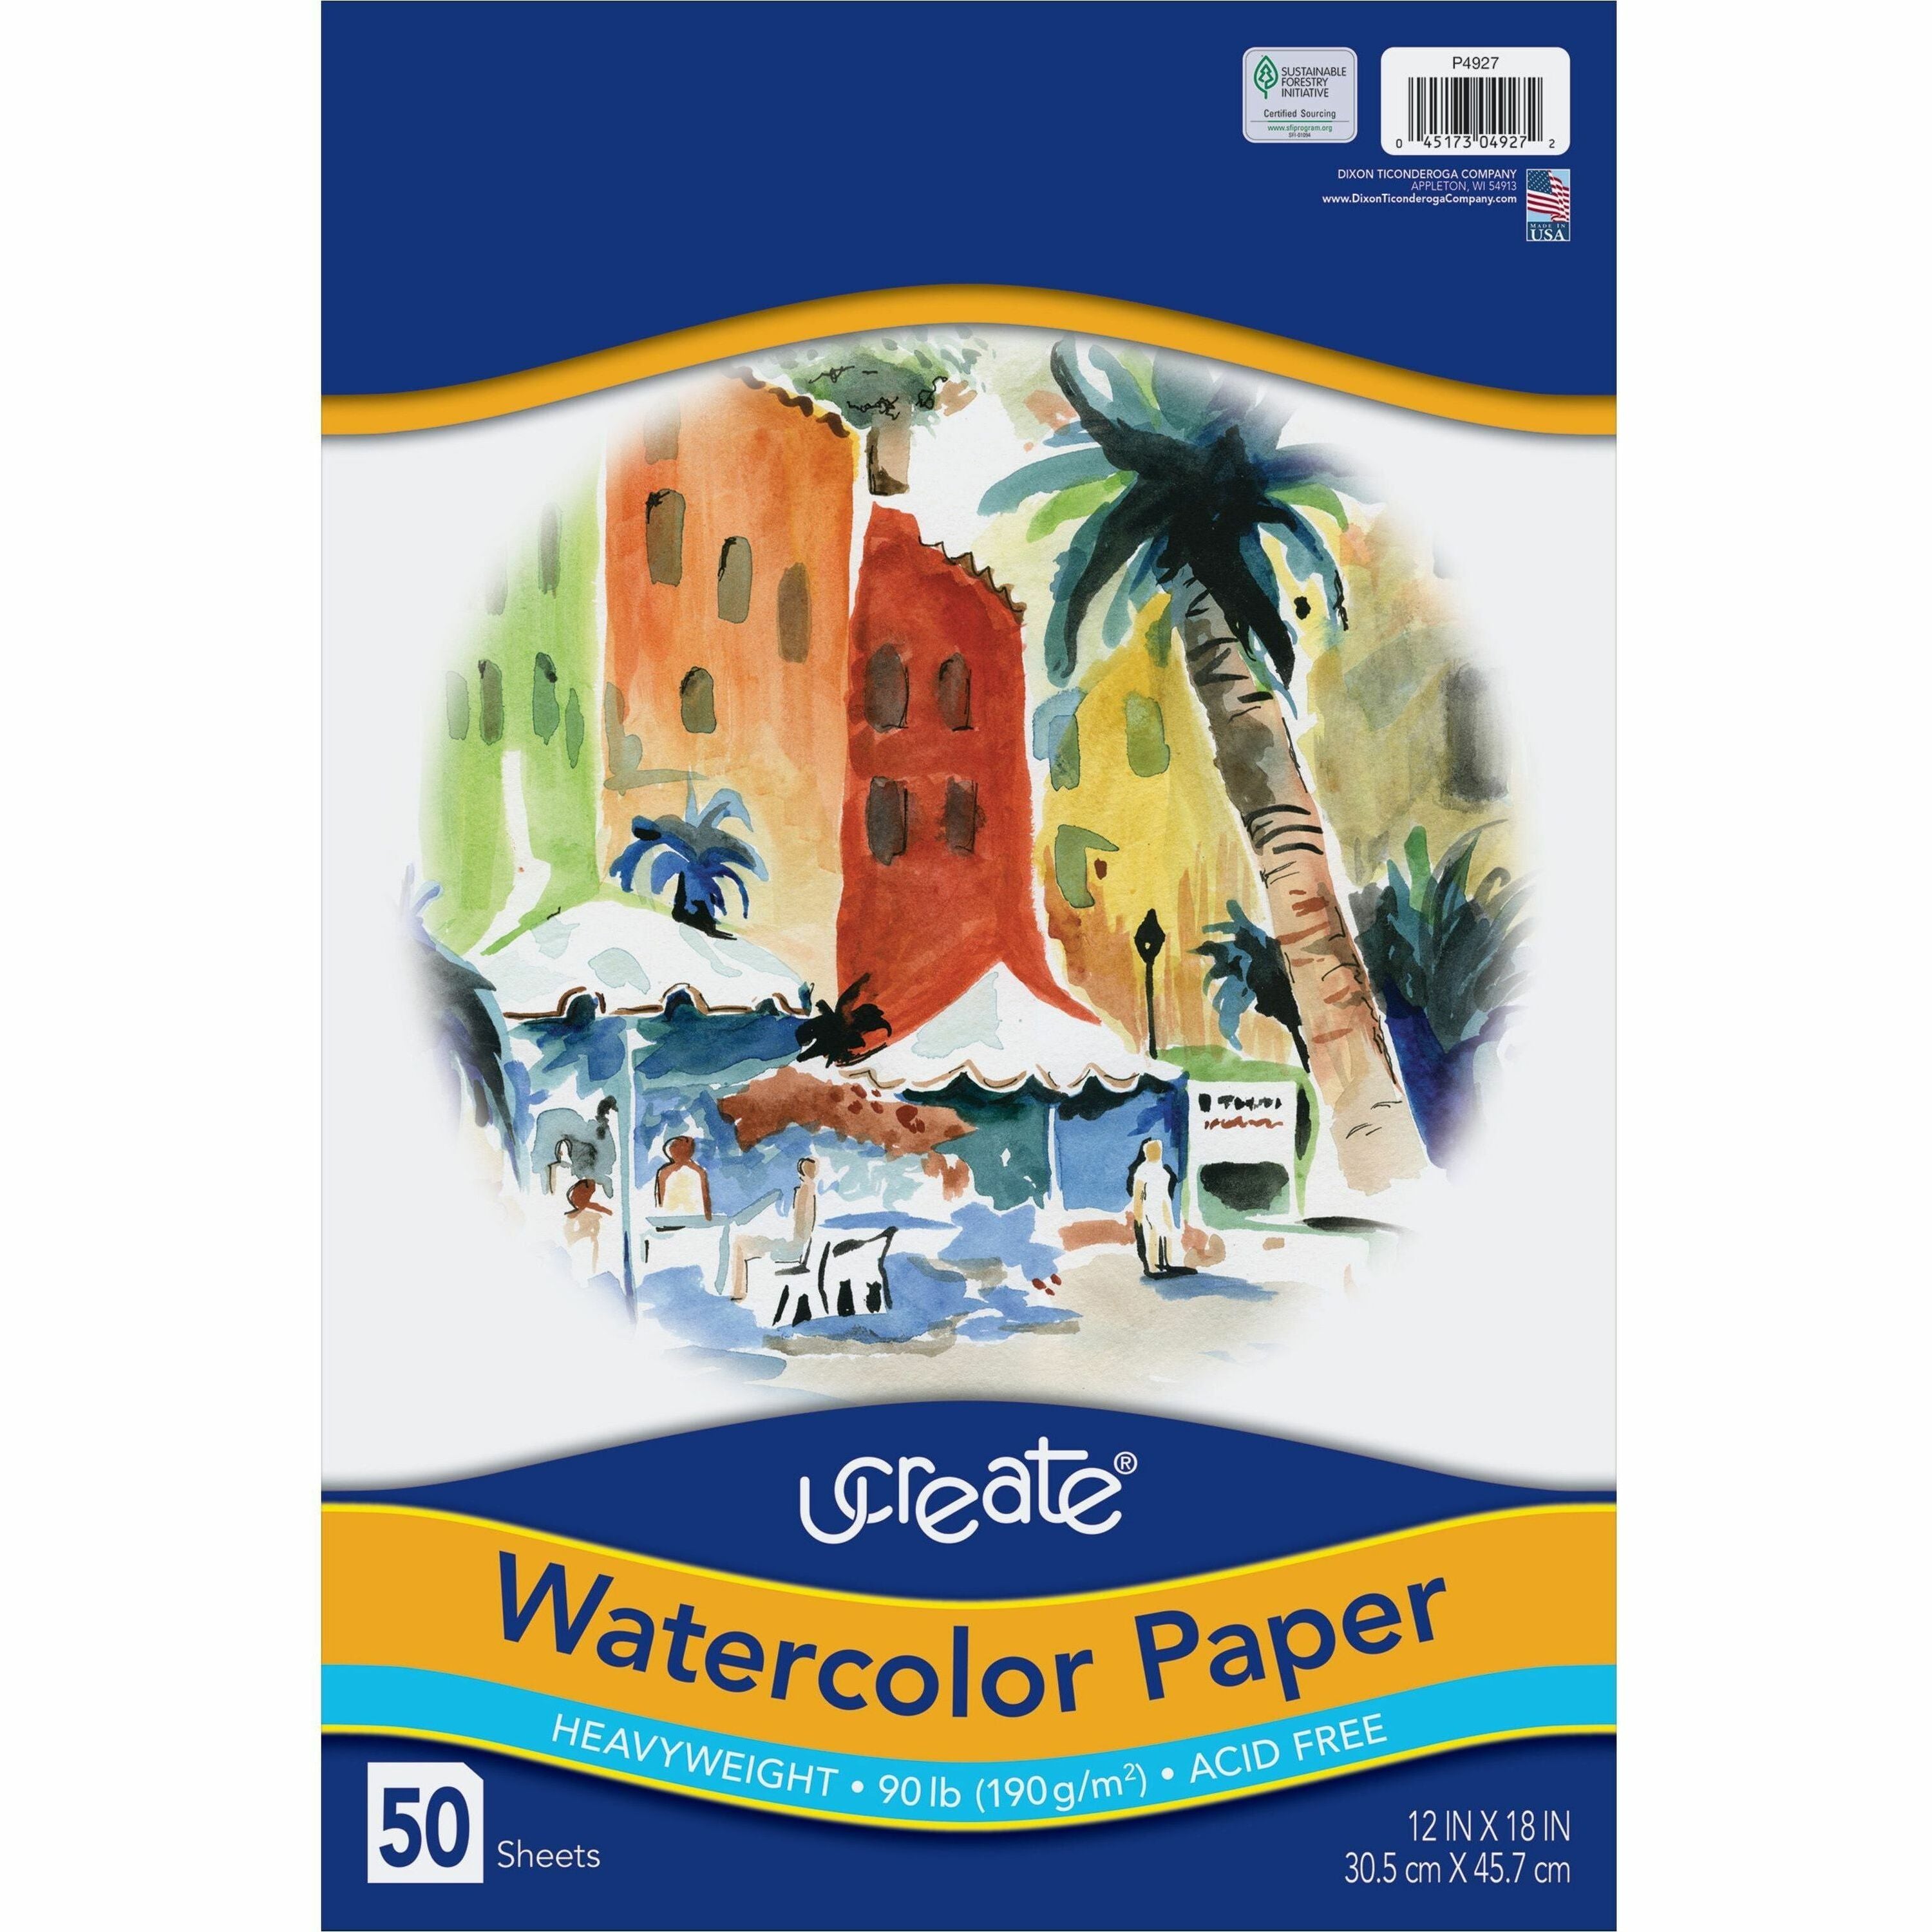 ucreate-watercolor-paper-12-x-18-90-lb-basis-weight-vellum-50-pack-sustainable-forestry-initiative-sfi-acid-free-white_pac4927 - 1